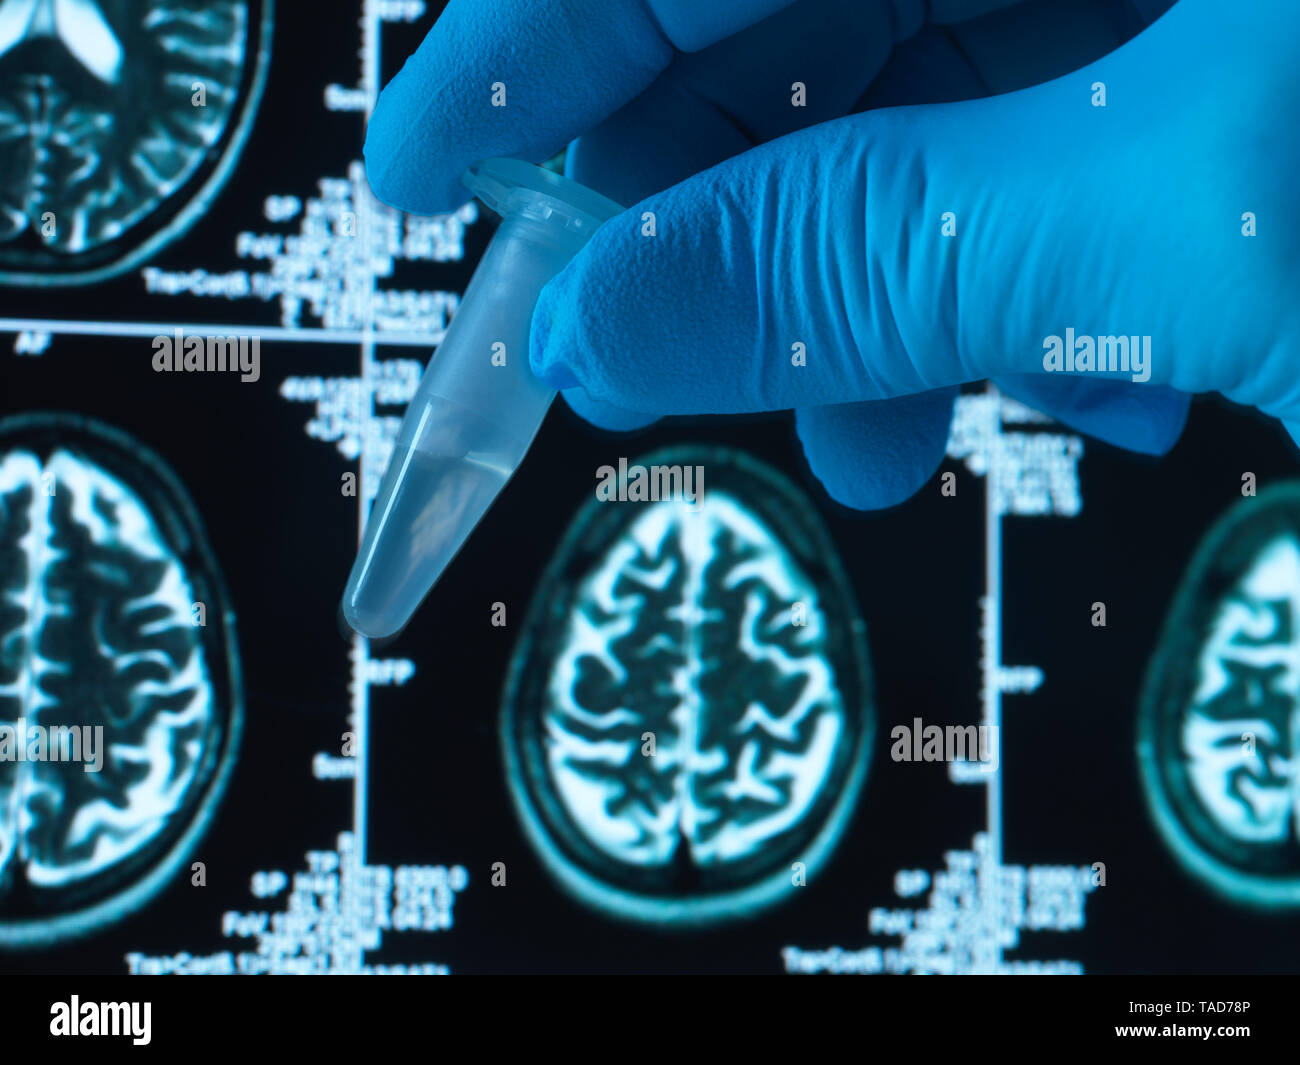 Pharmaceutical research into brain disorders including dementia and alzheimer's, eppendorf tube Stock Photo